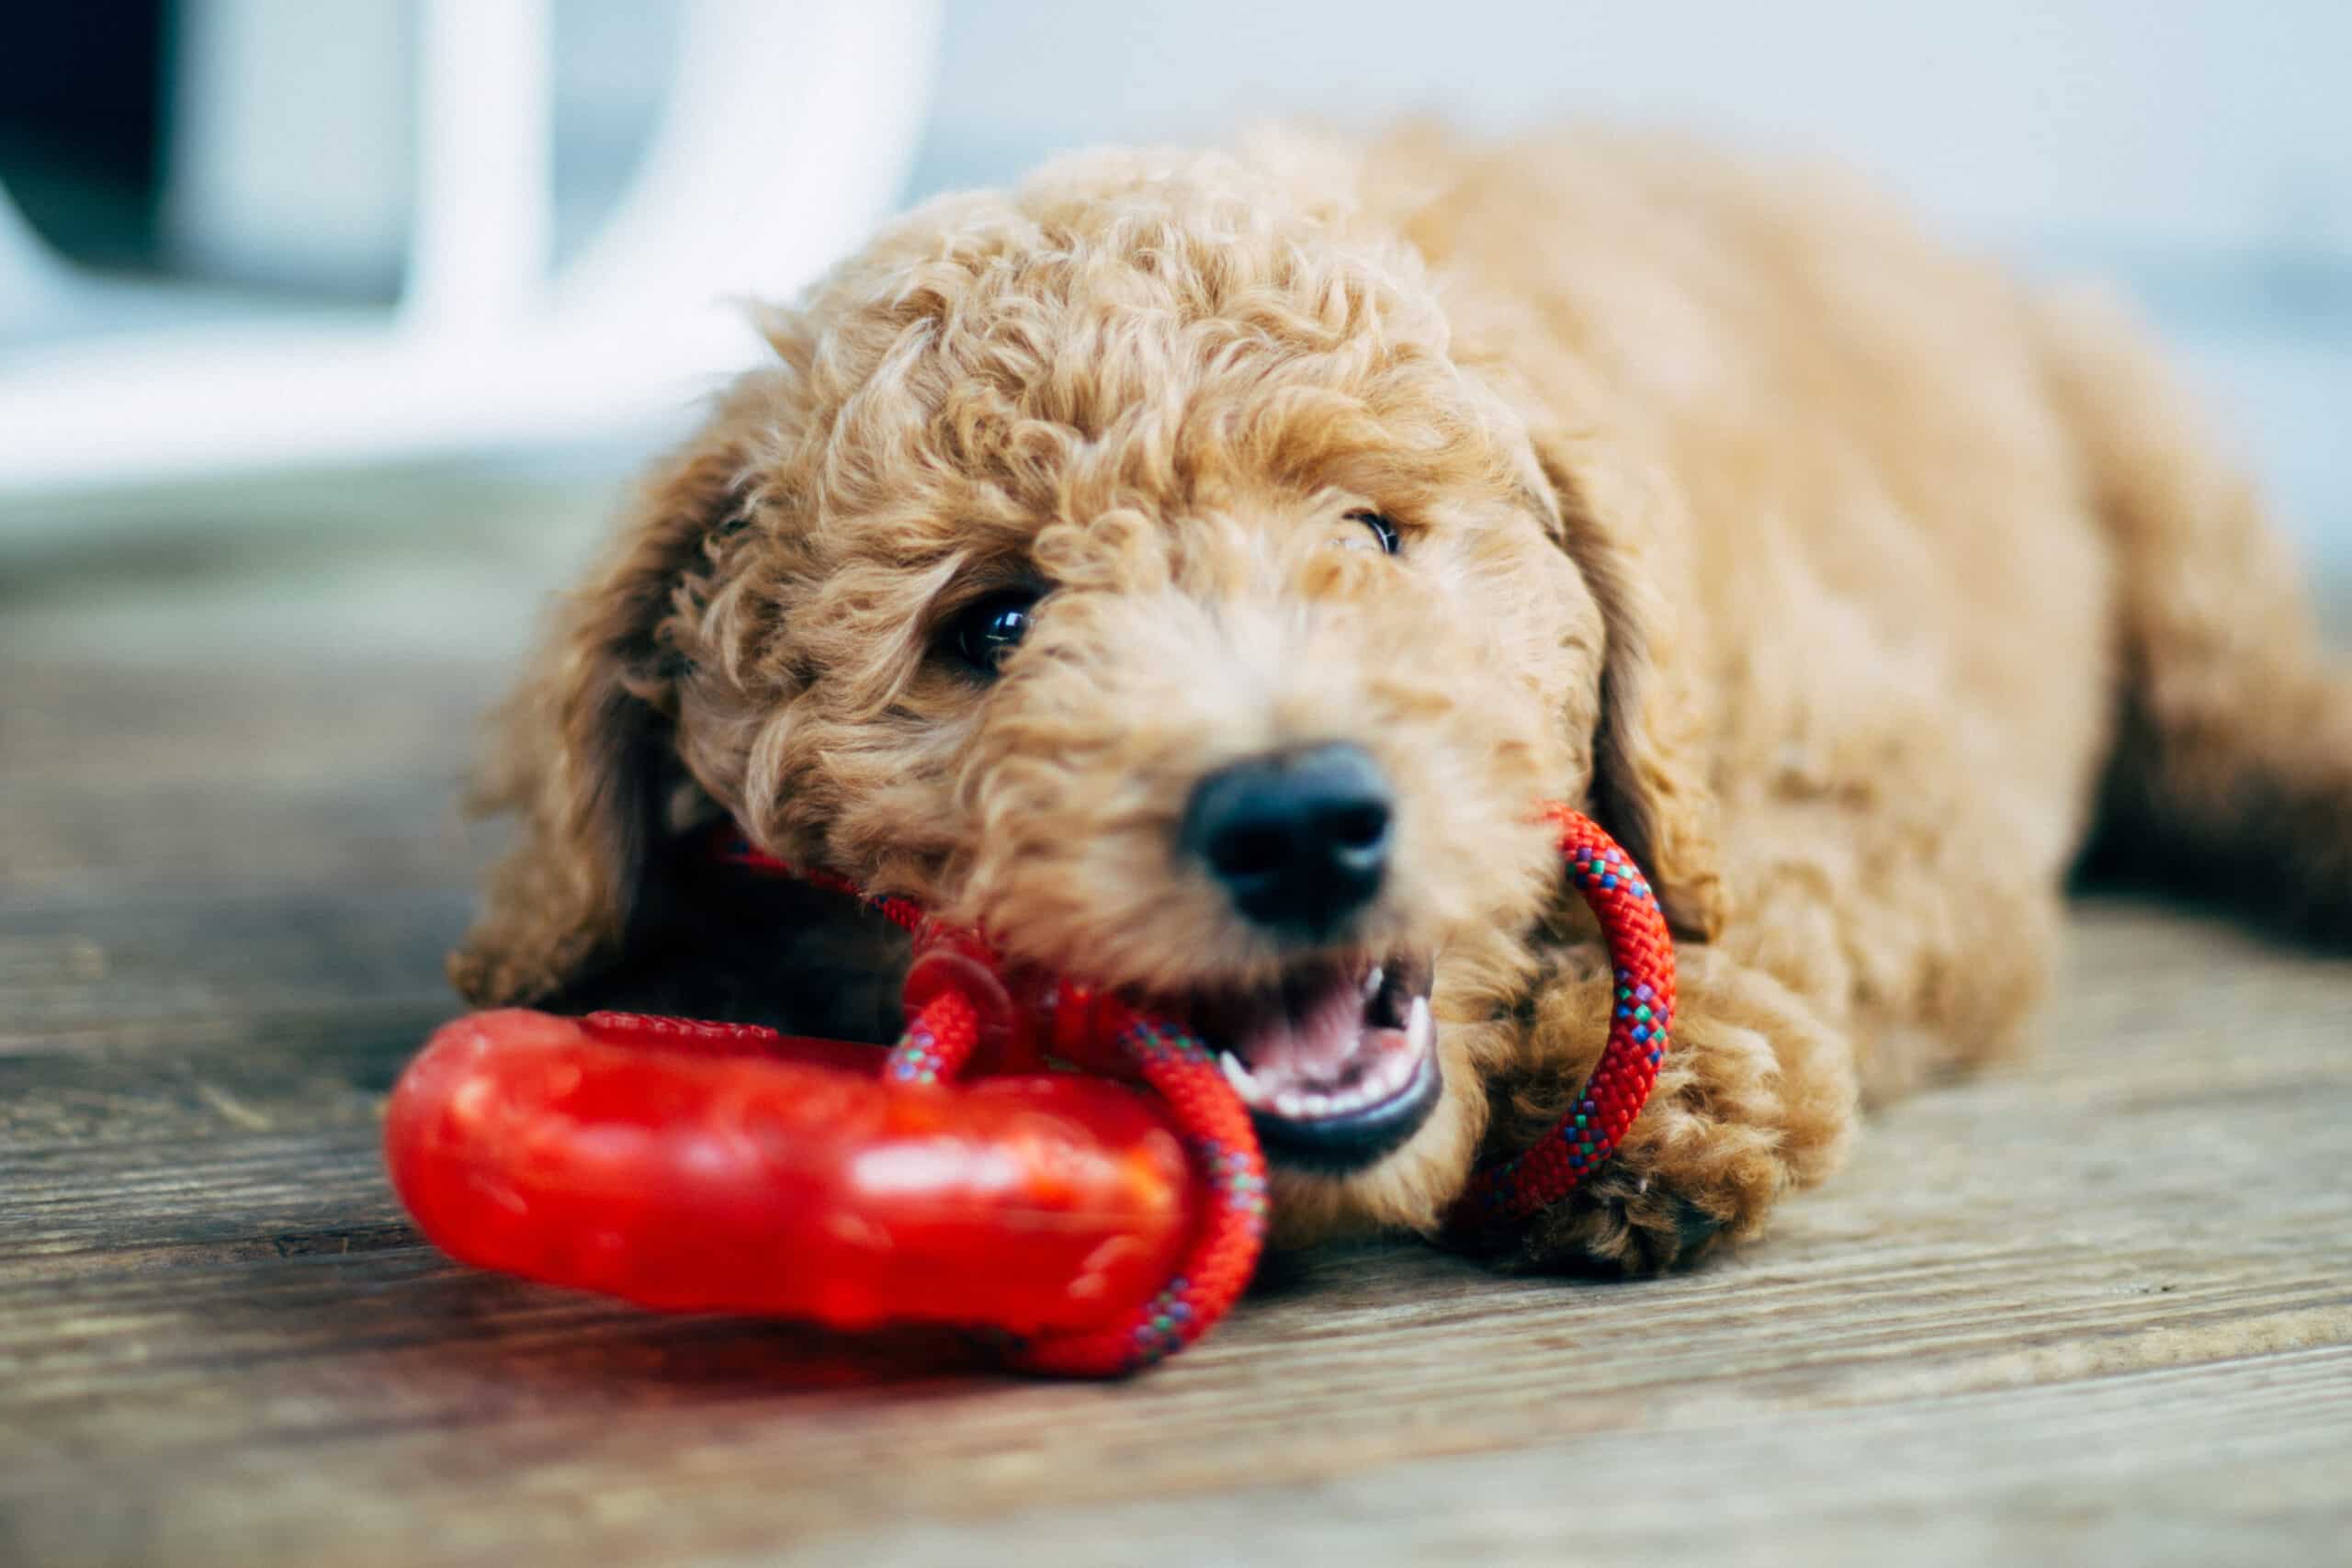 Choosing the Best Toy for Your Dog